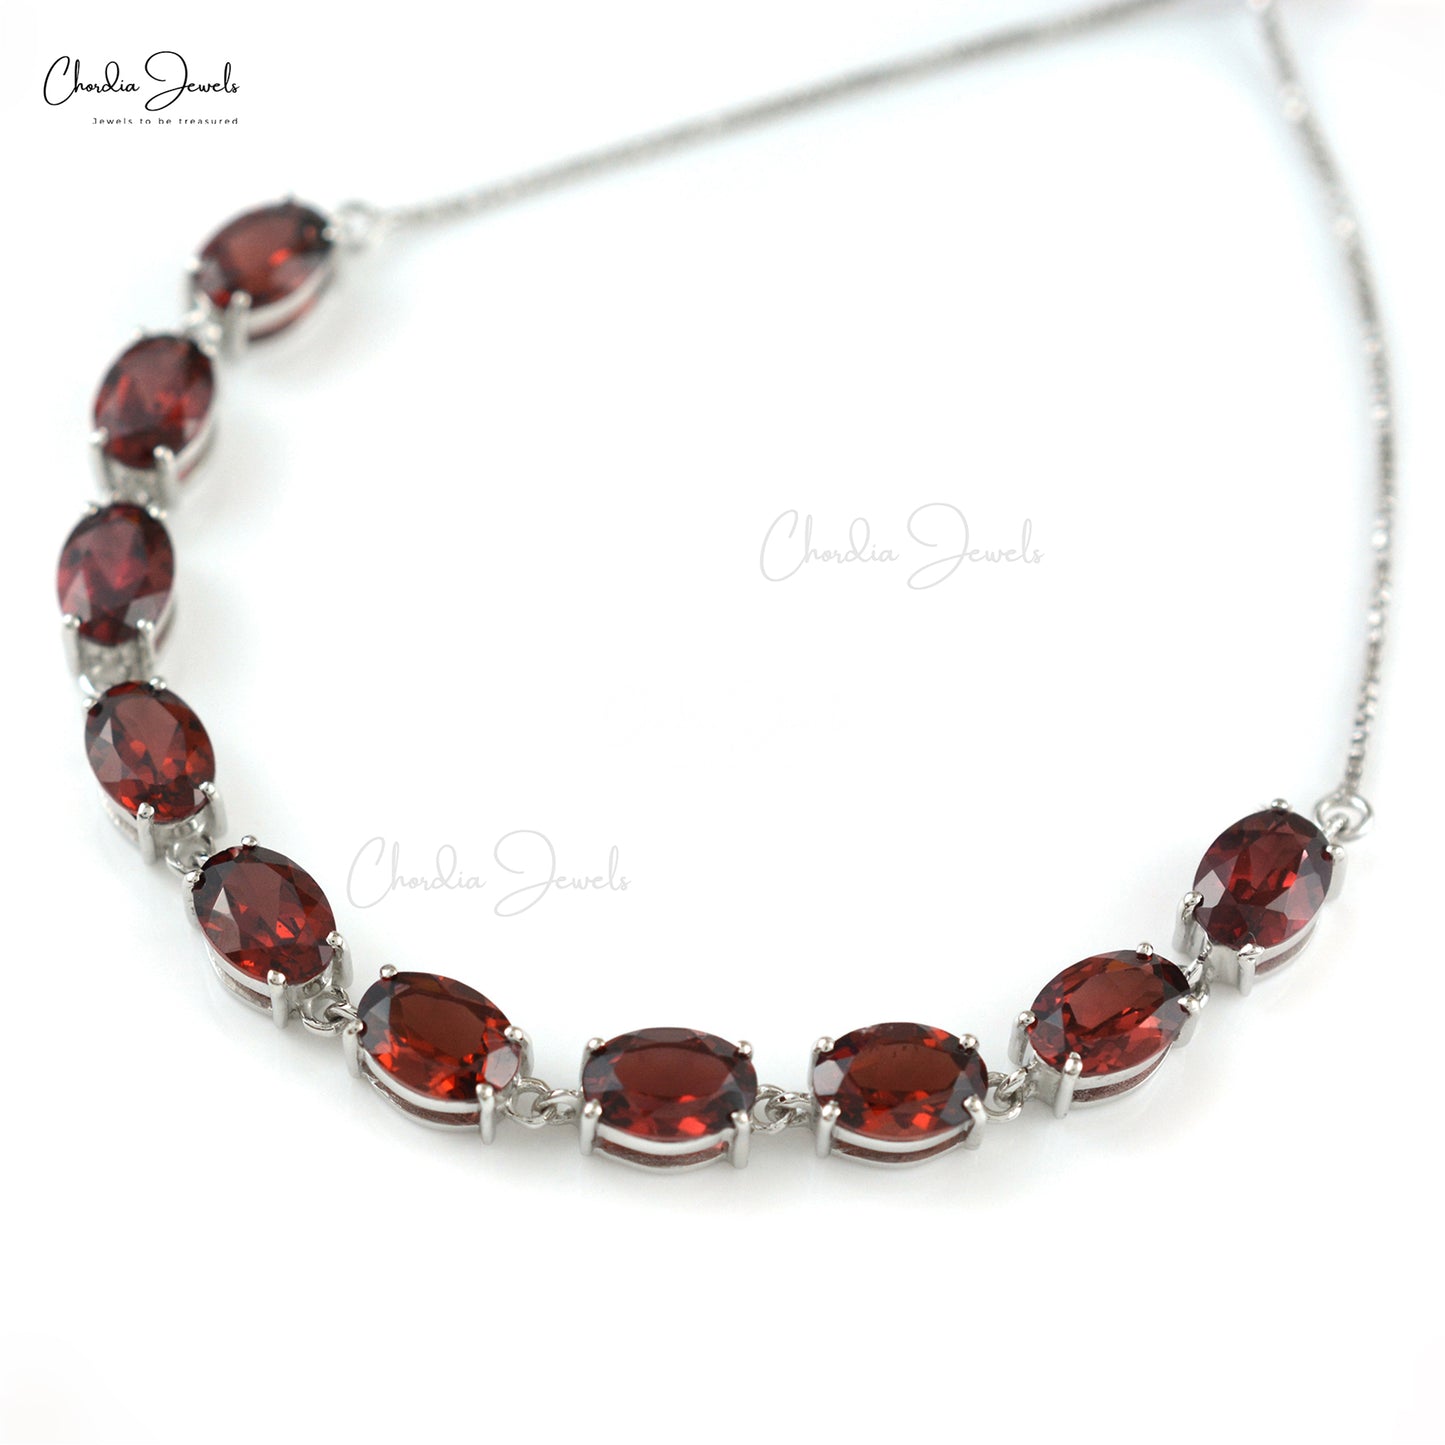 Authentic Garnet Tennis Bracelet High Quality Jewelry 925 Sterling Silver Bracelet January Birthstone Jewelry At Reasonable Price